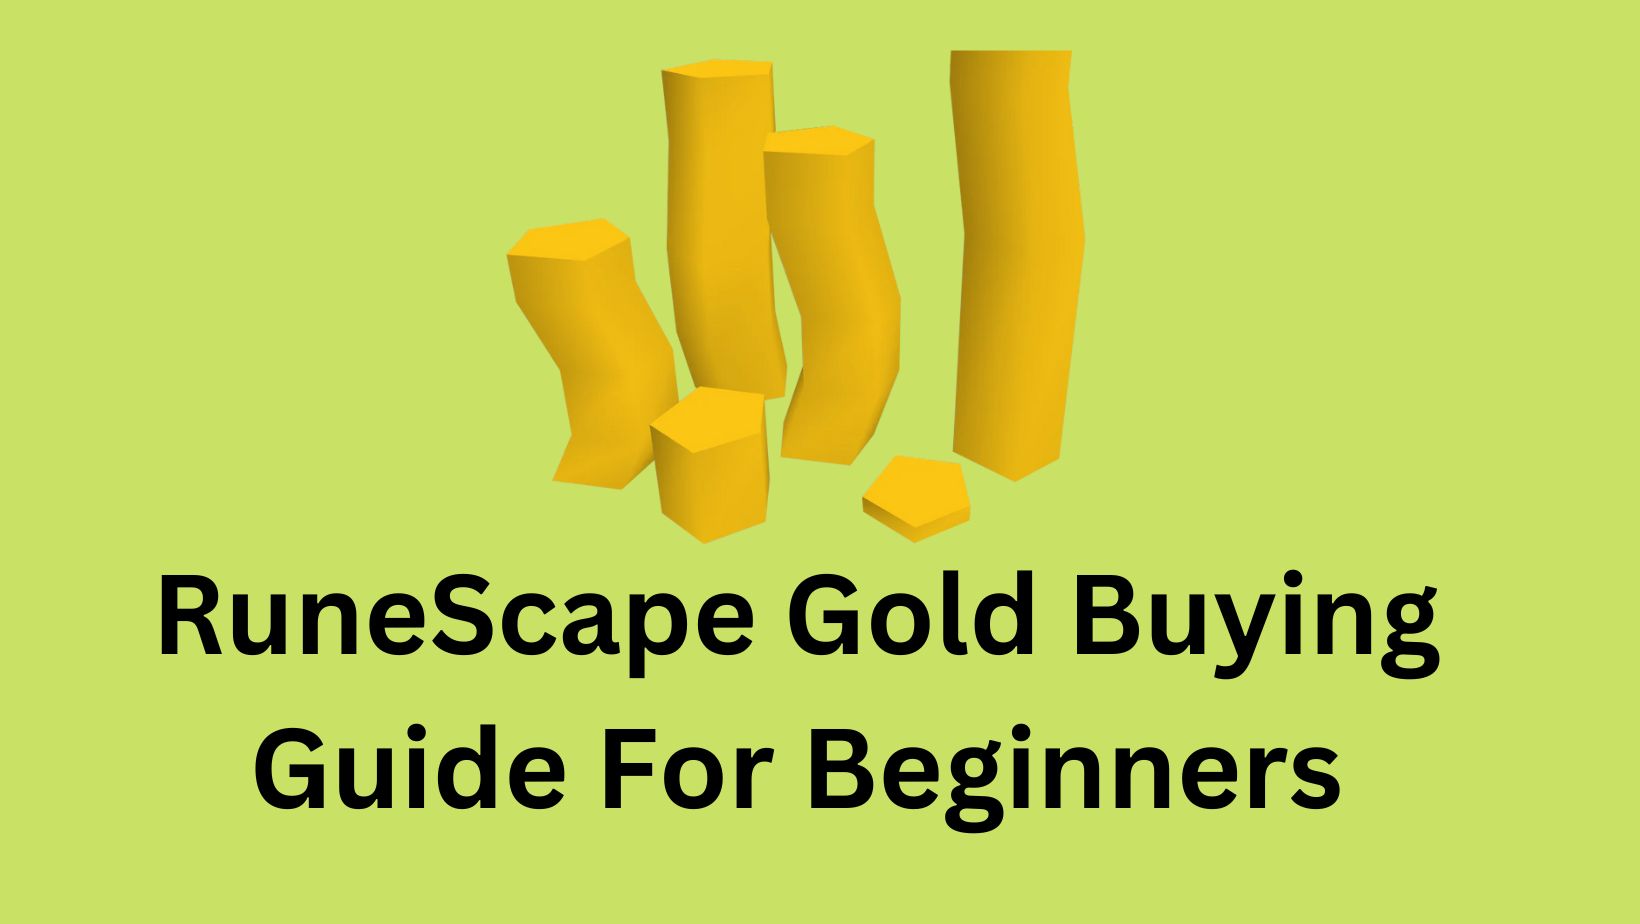 RuneScape Gold Buying Guide for Beginners